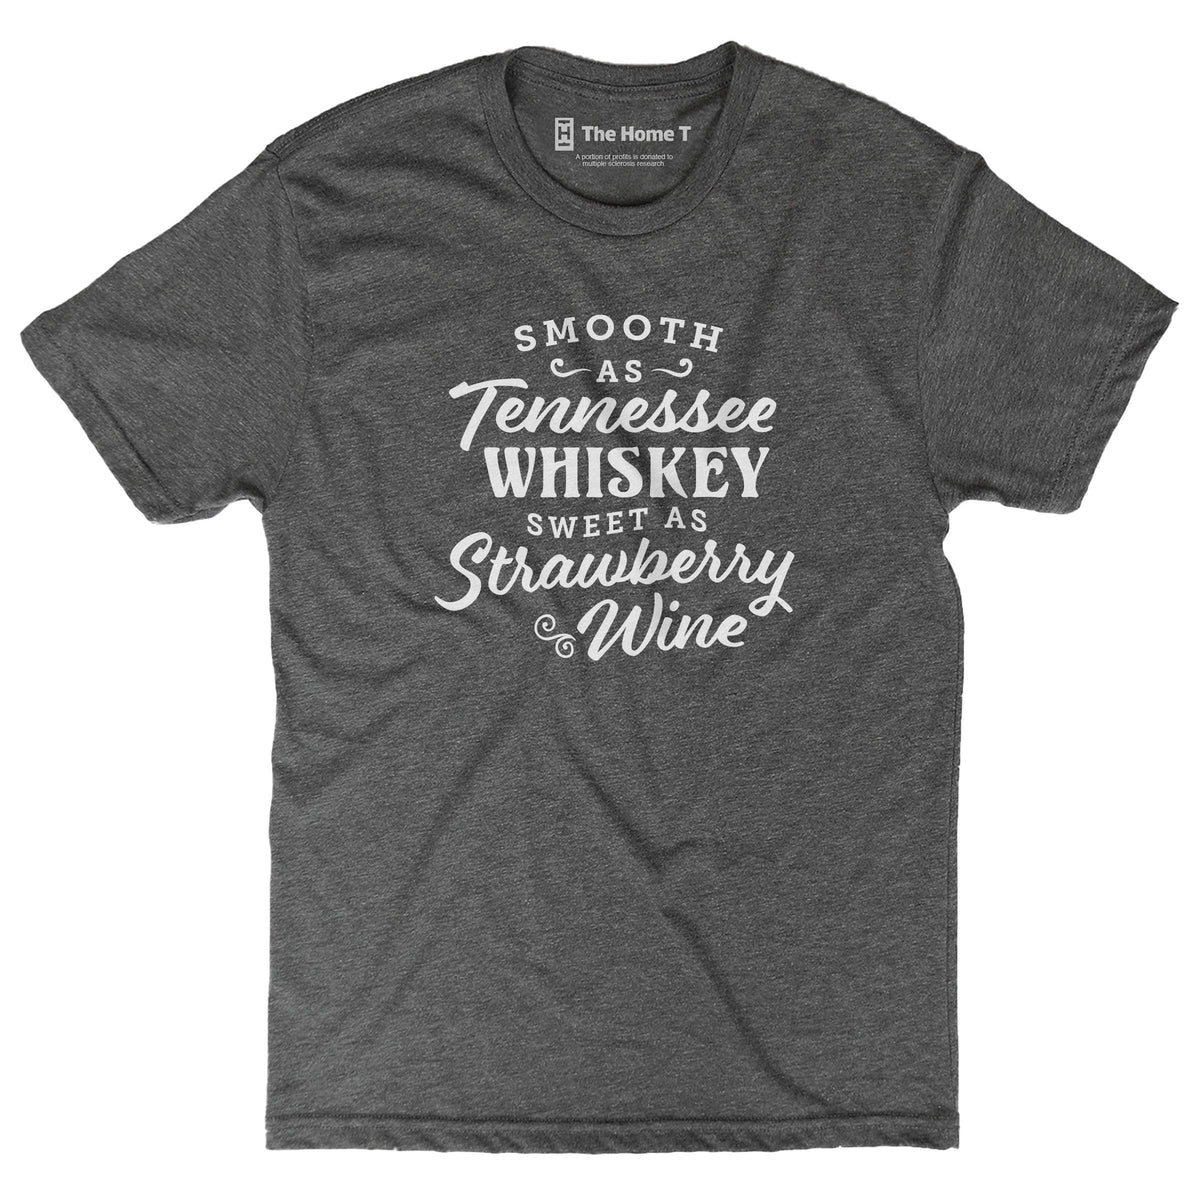 Smooth as Tennessee whiskey. Sweet as strawberry wine. Dark Grey Crewneck